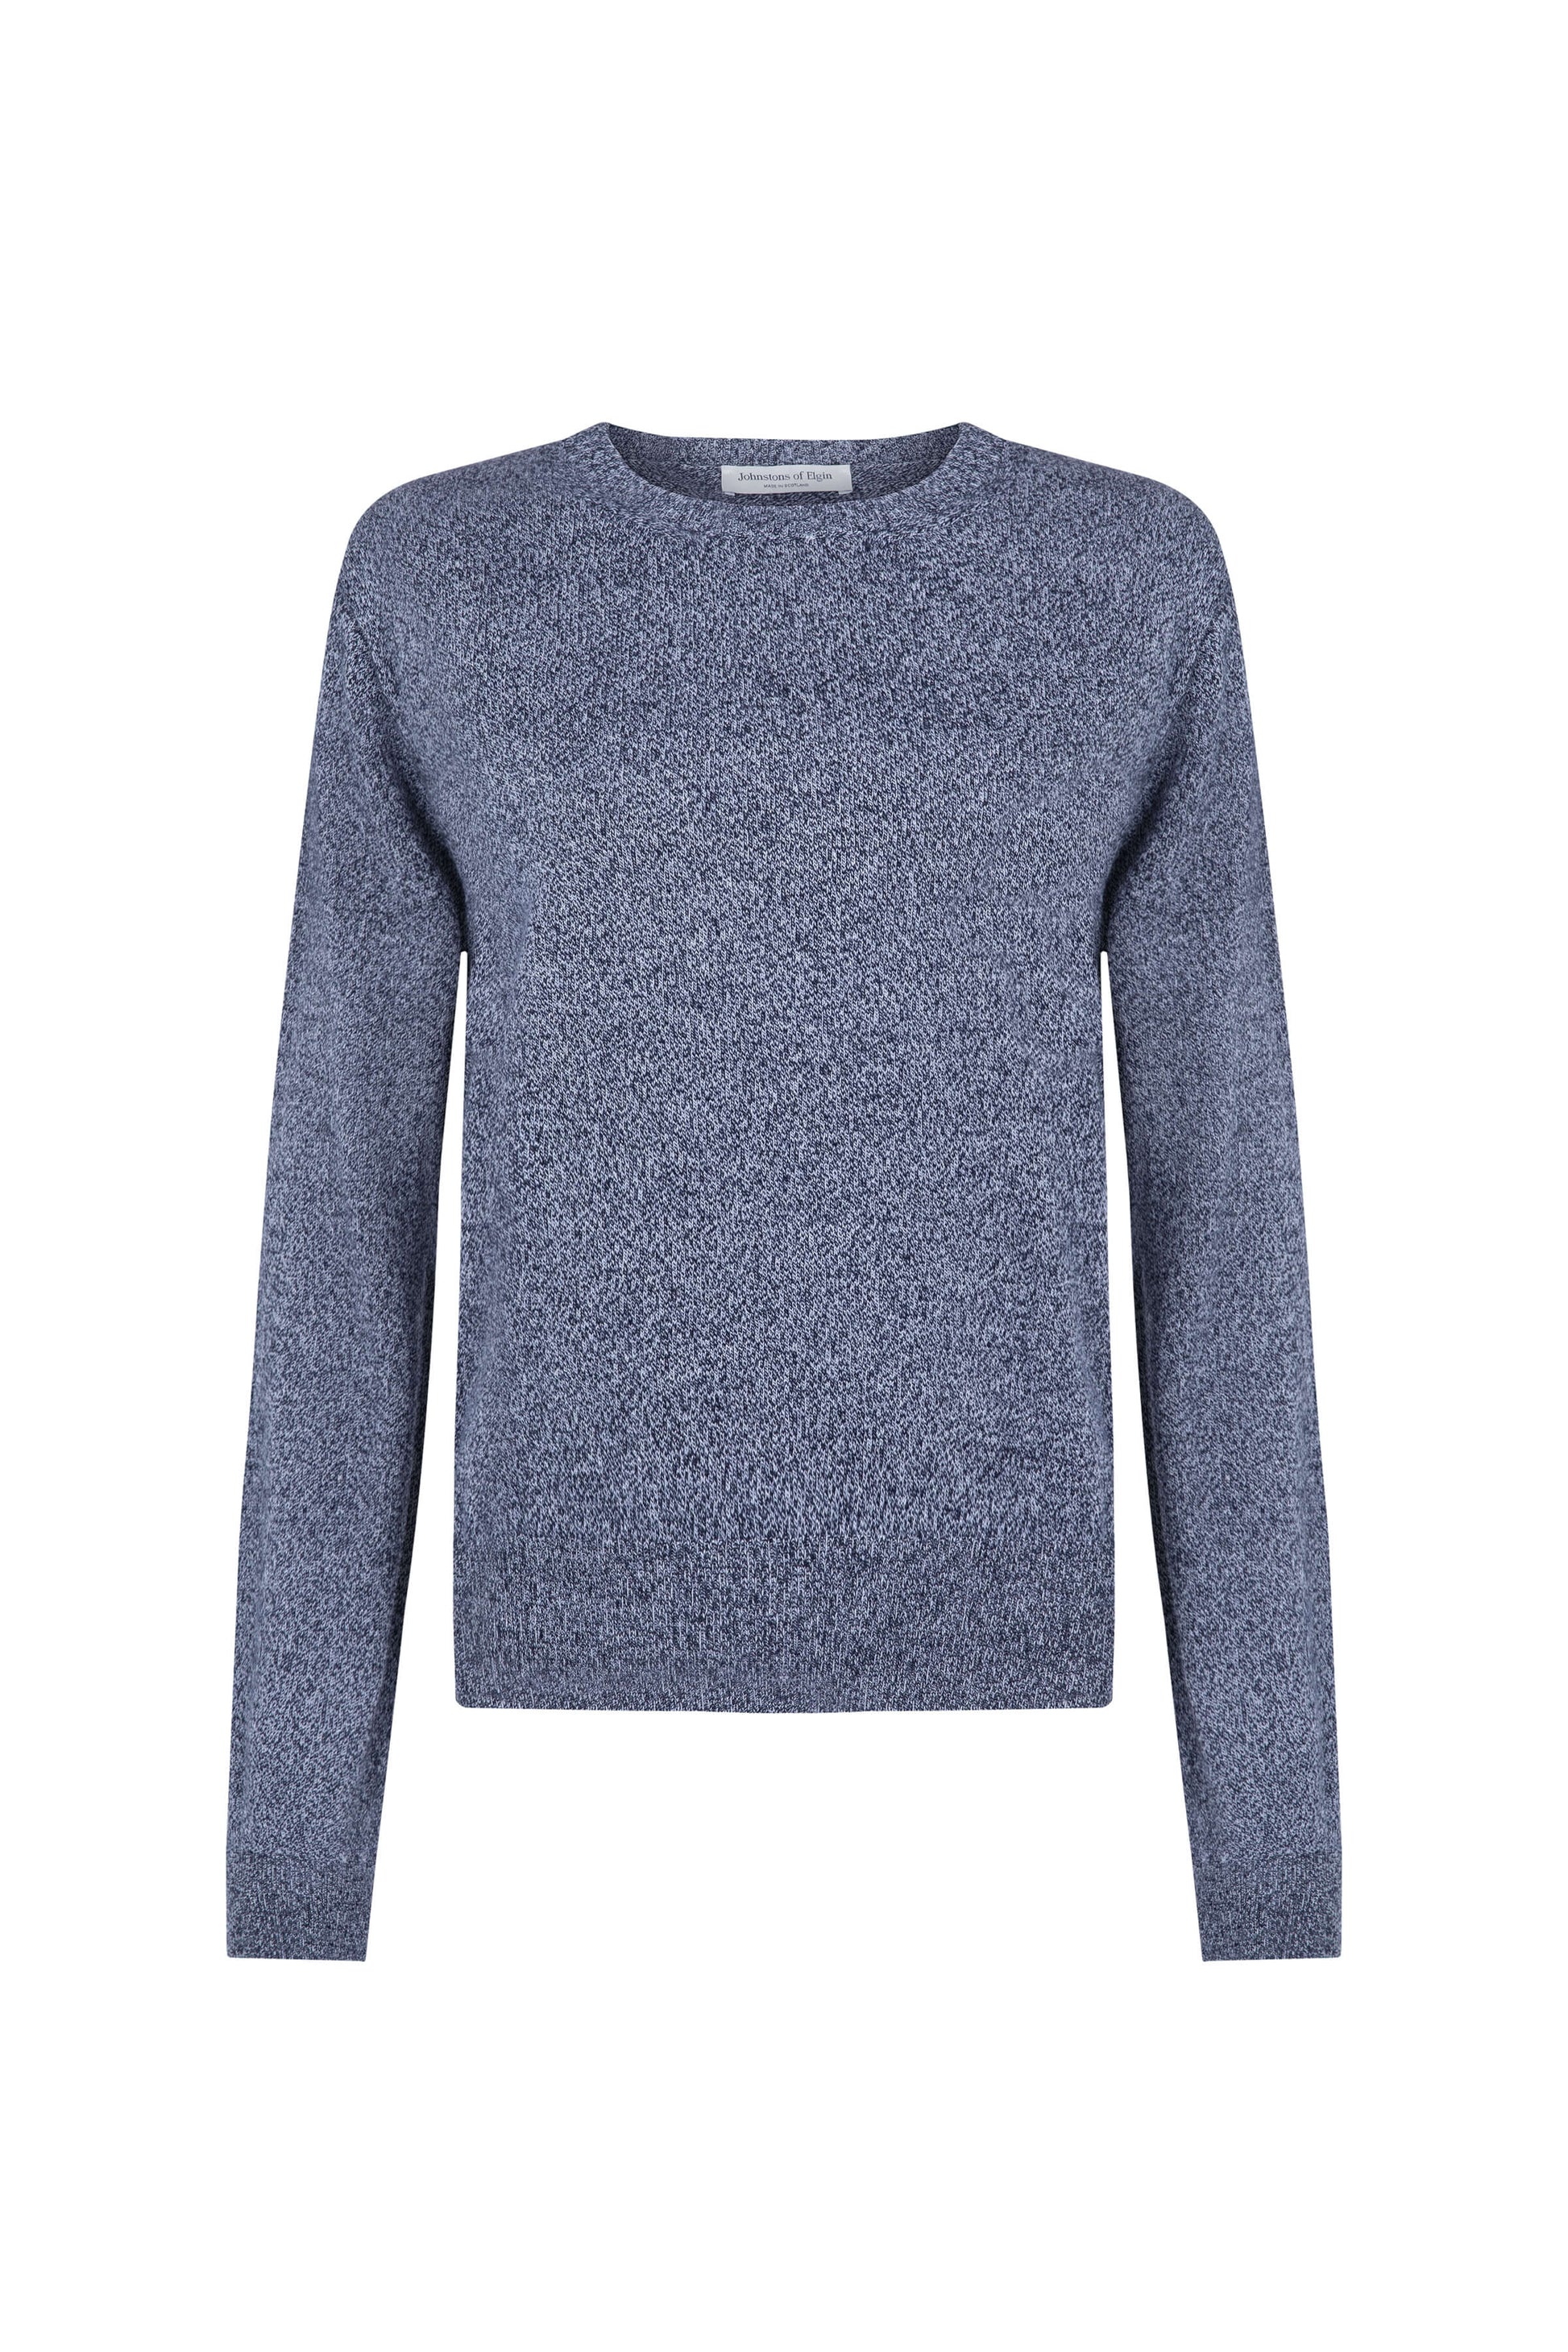 Johnstons of Elgin SS24 Women's Knitwear Dark Navy Marl Cropped Classic Cashmere Round Neck KAI05142004580